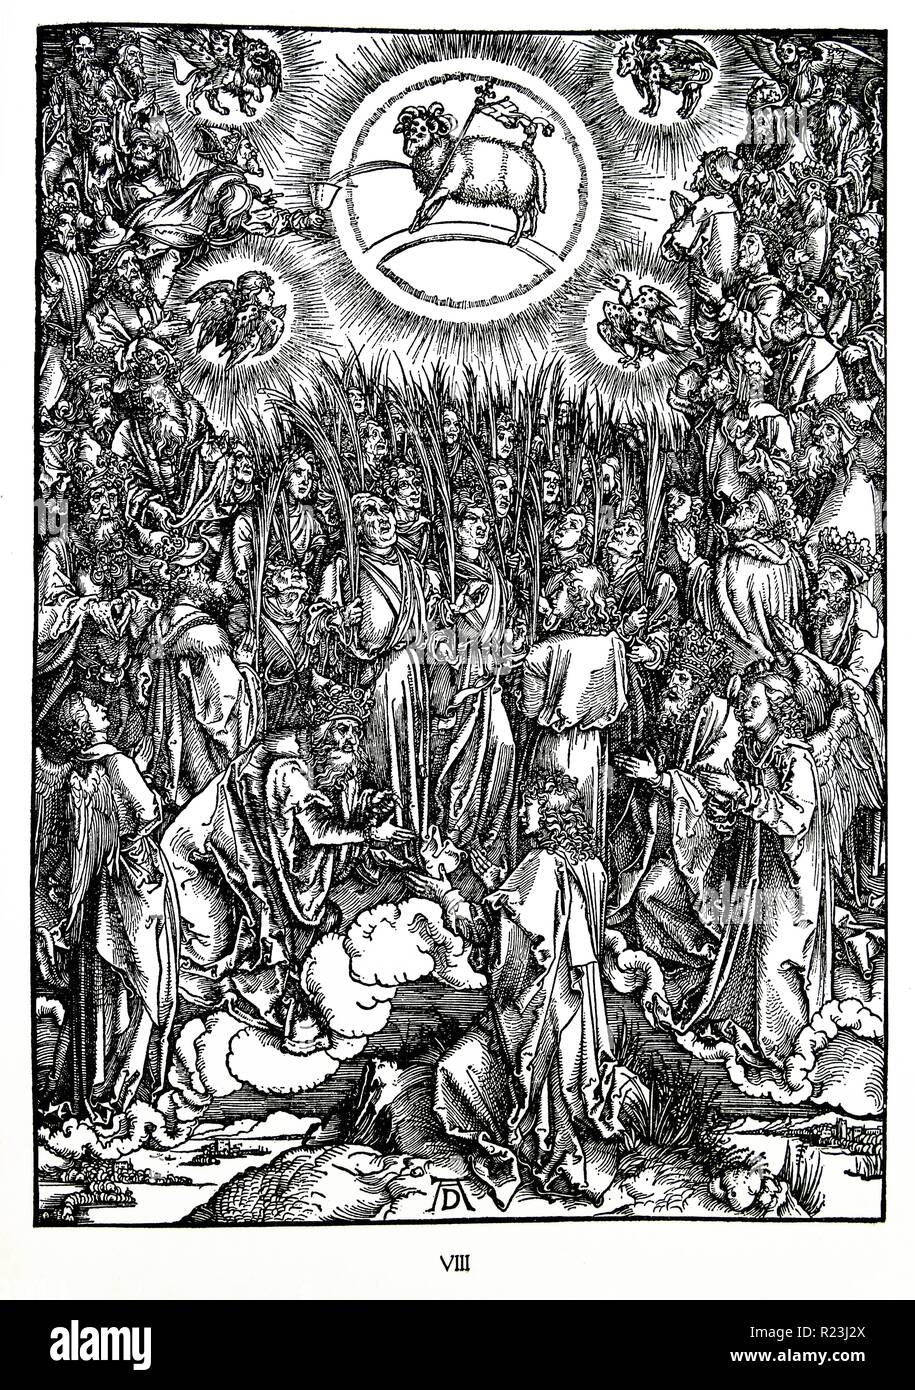 Martin Luther: Preface to the Revelation of John ( 1522): Vorrede zur Offenbarung Johannes (1522). Apocalypse in figures; Woodcut by Albrecht Durer; The Adoration of the Lamb and the Hymn of the Chosen. The Revelation of Saint John Stock Photo